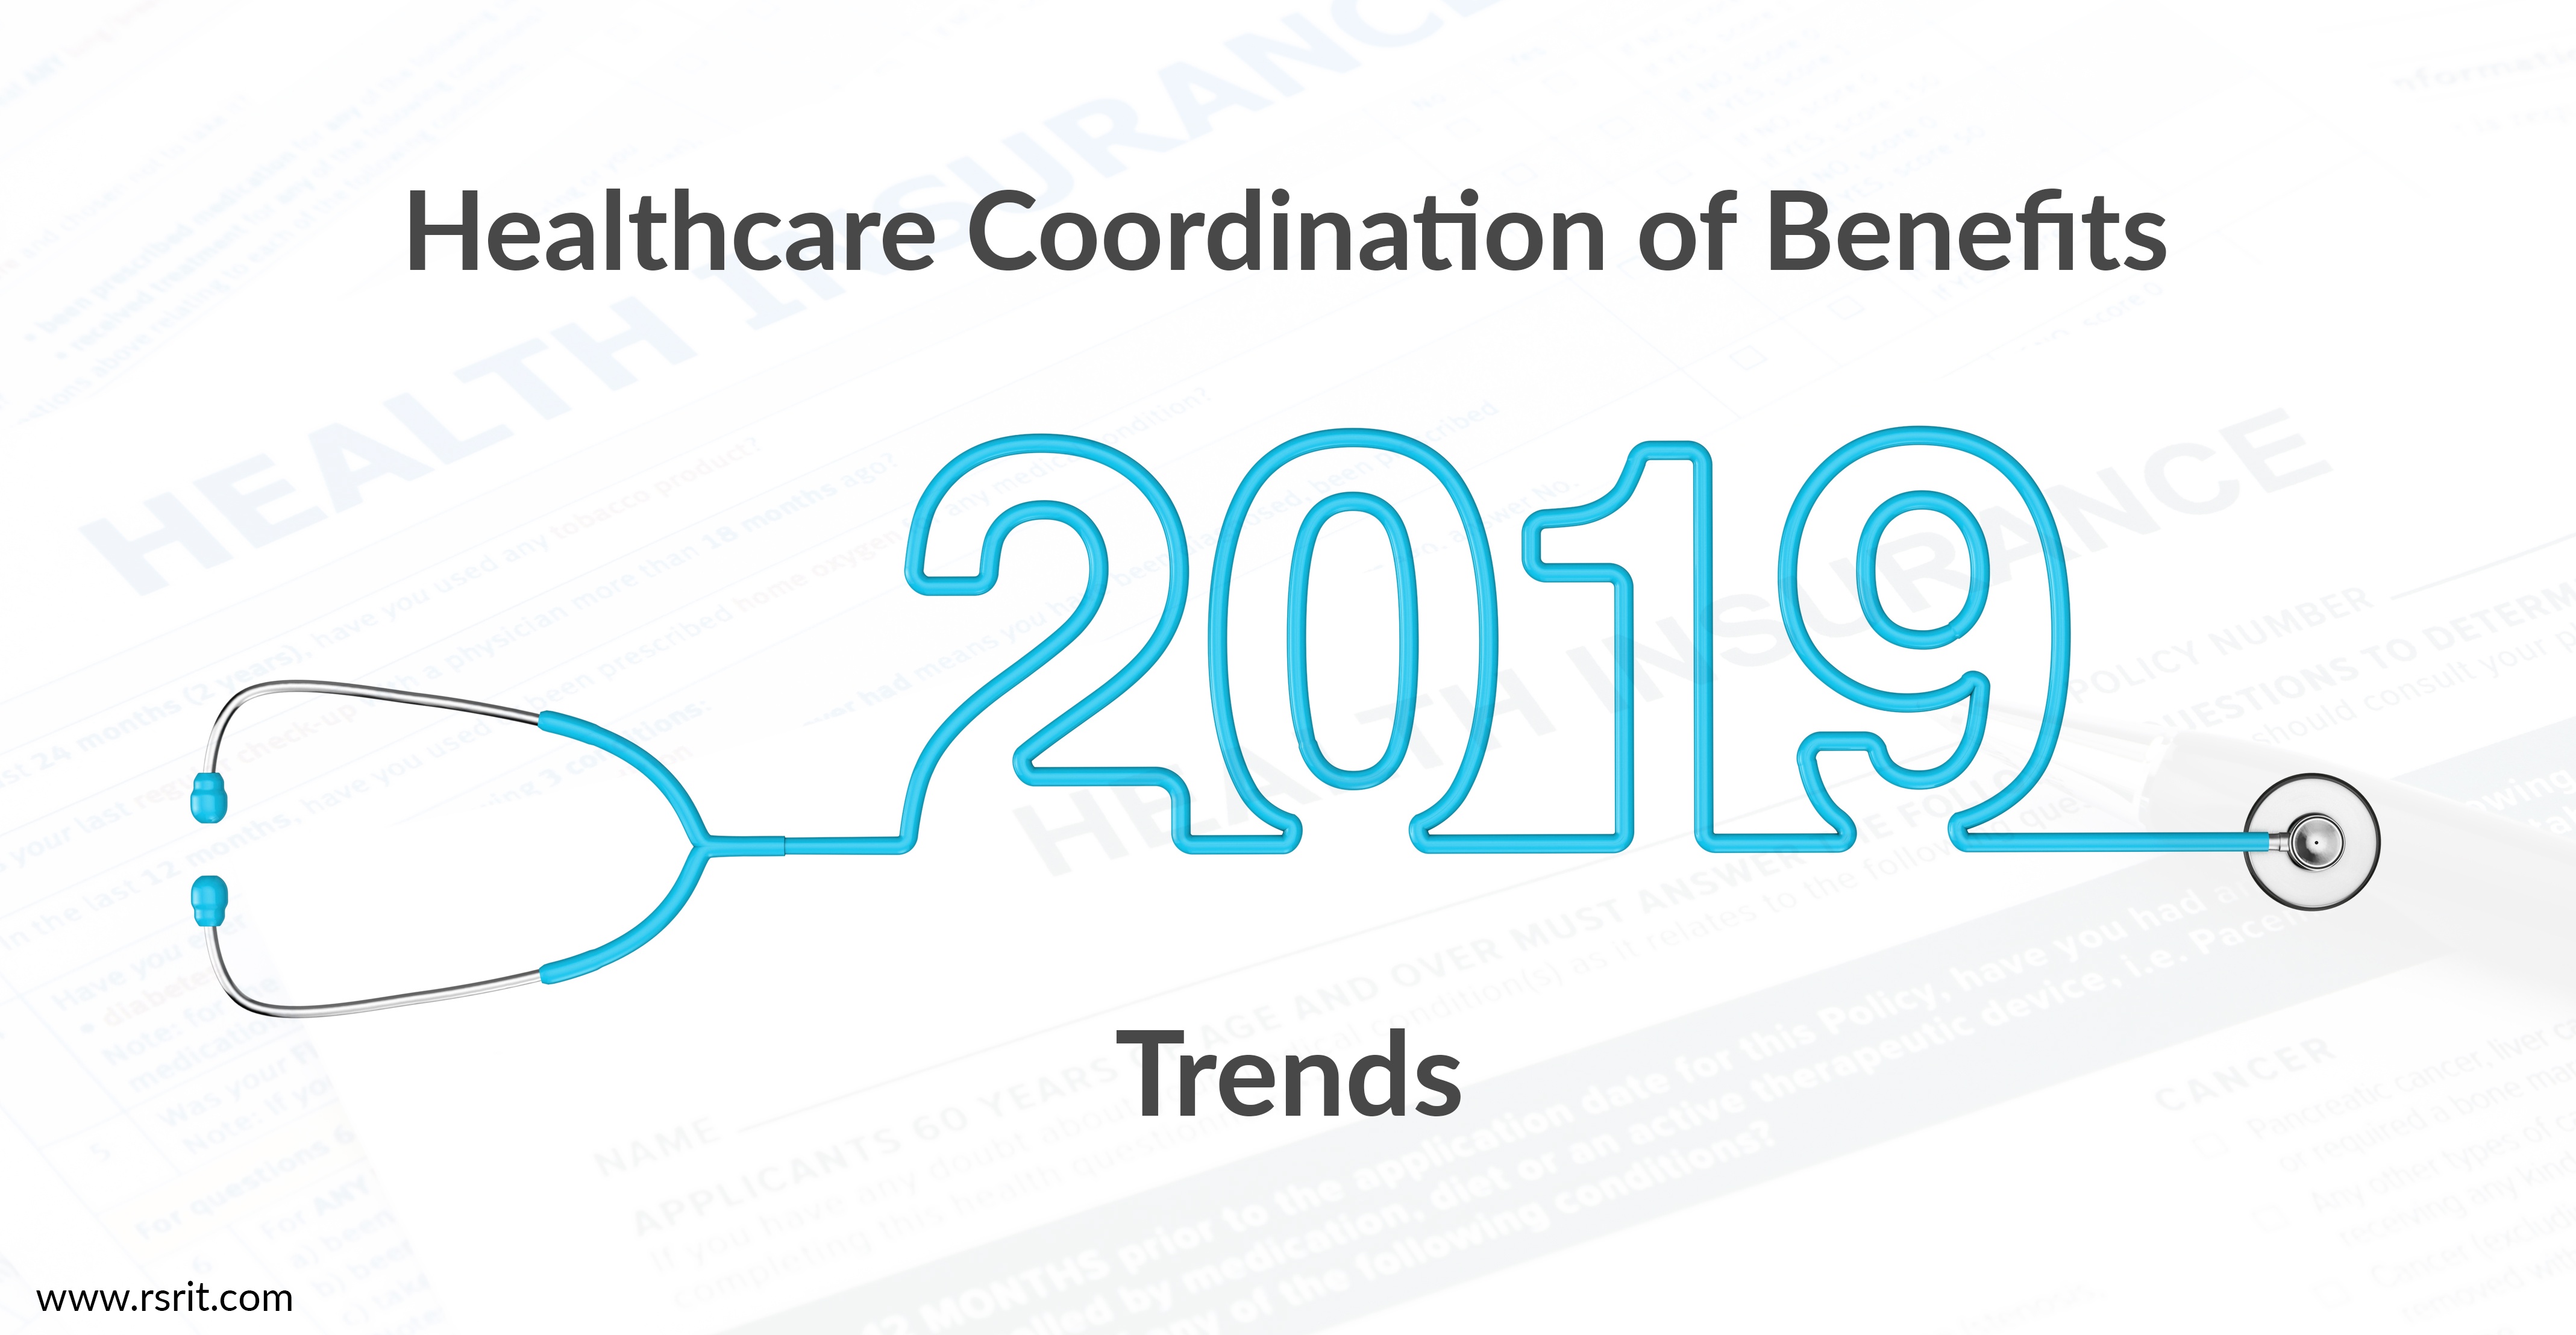 Trends in healthcare coordination of benefits for 2019